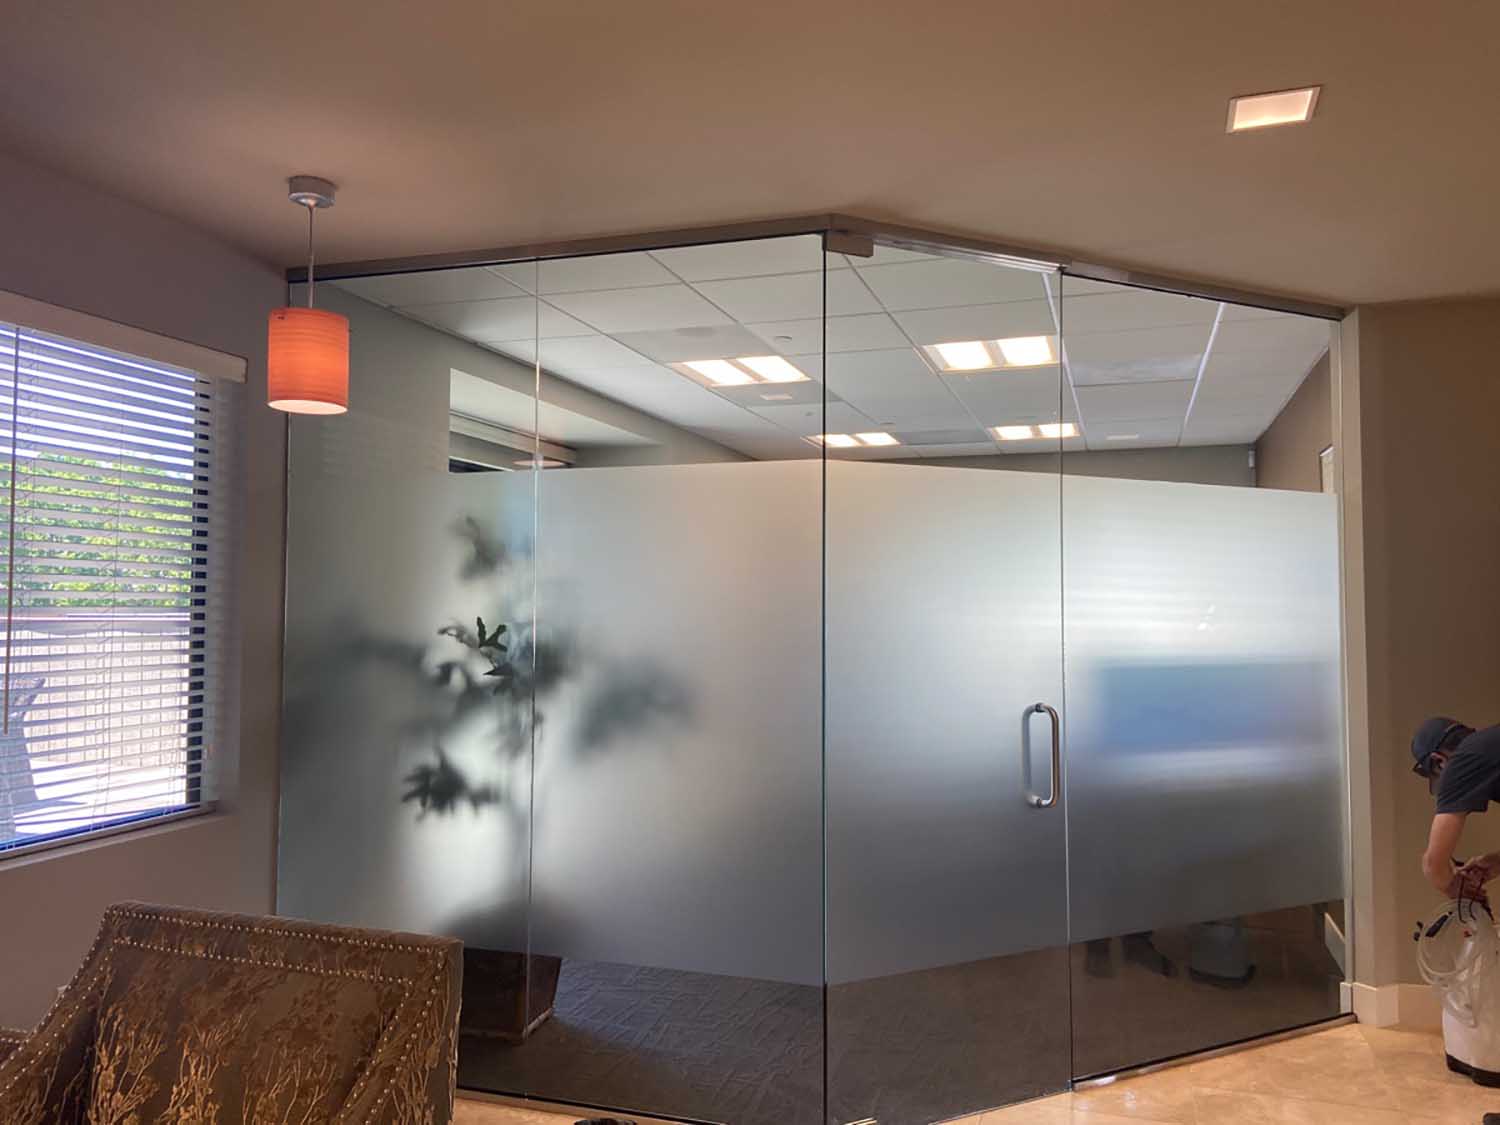 Before & After: Privacy Window Film for a Alamo, CA Office, installed by ClimatePro. Get a free estimate for your San Francisco Bay Area workplace.